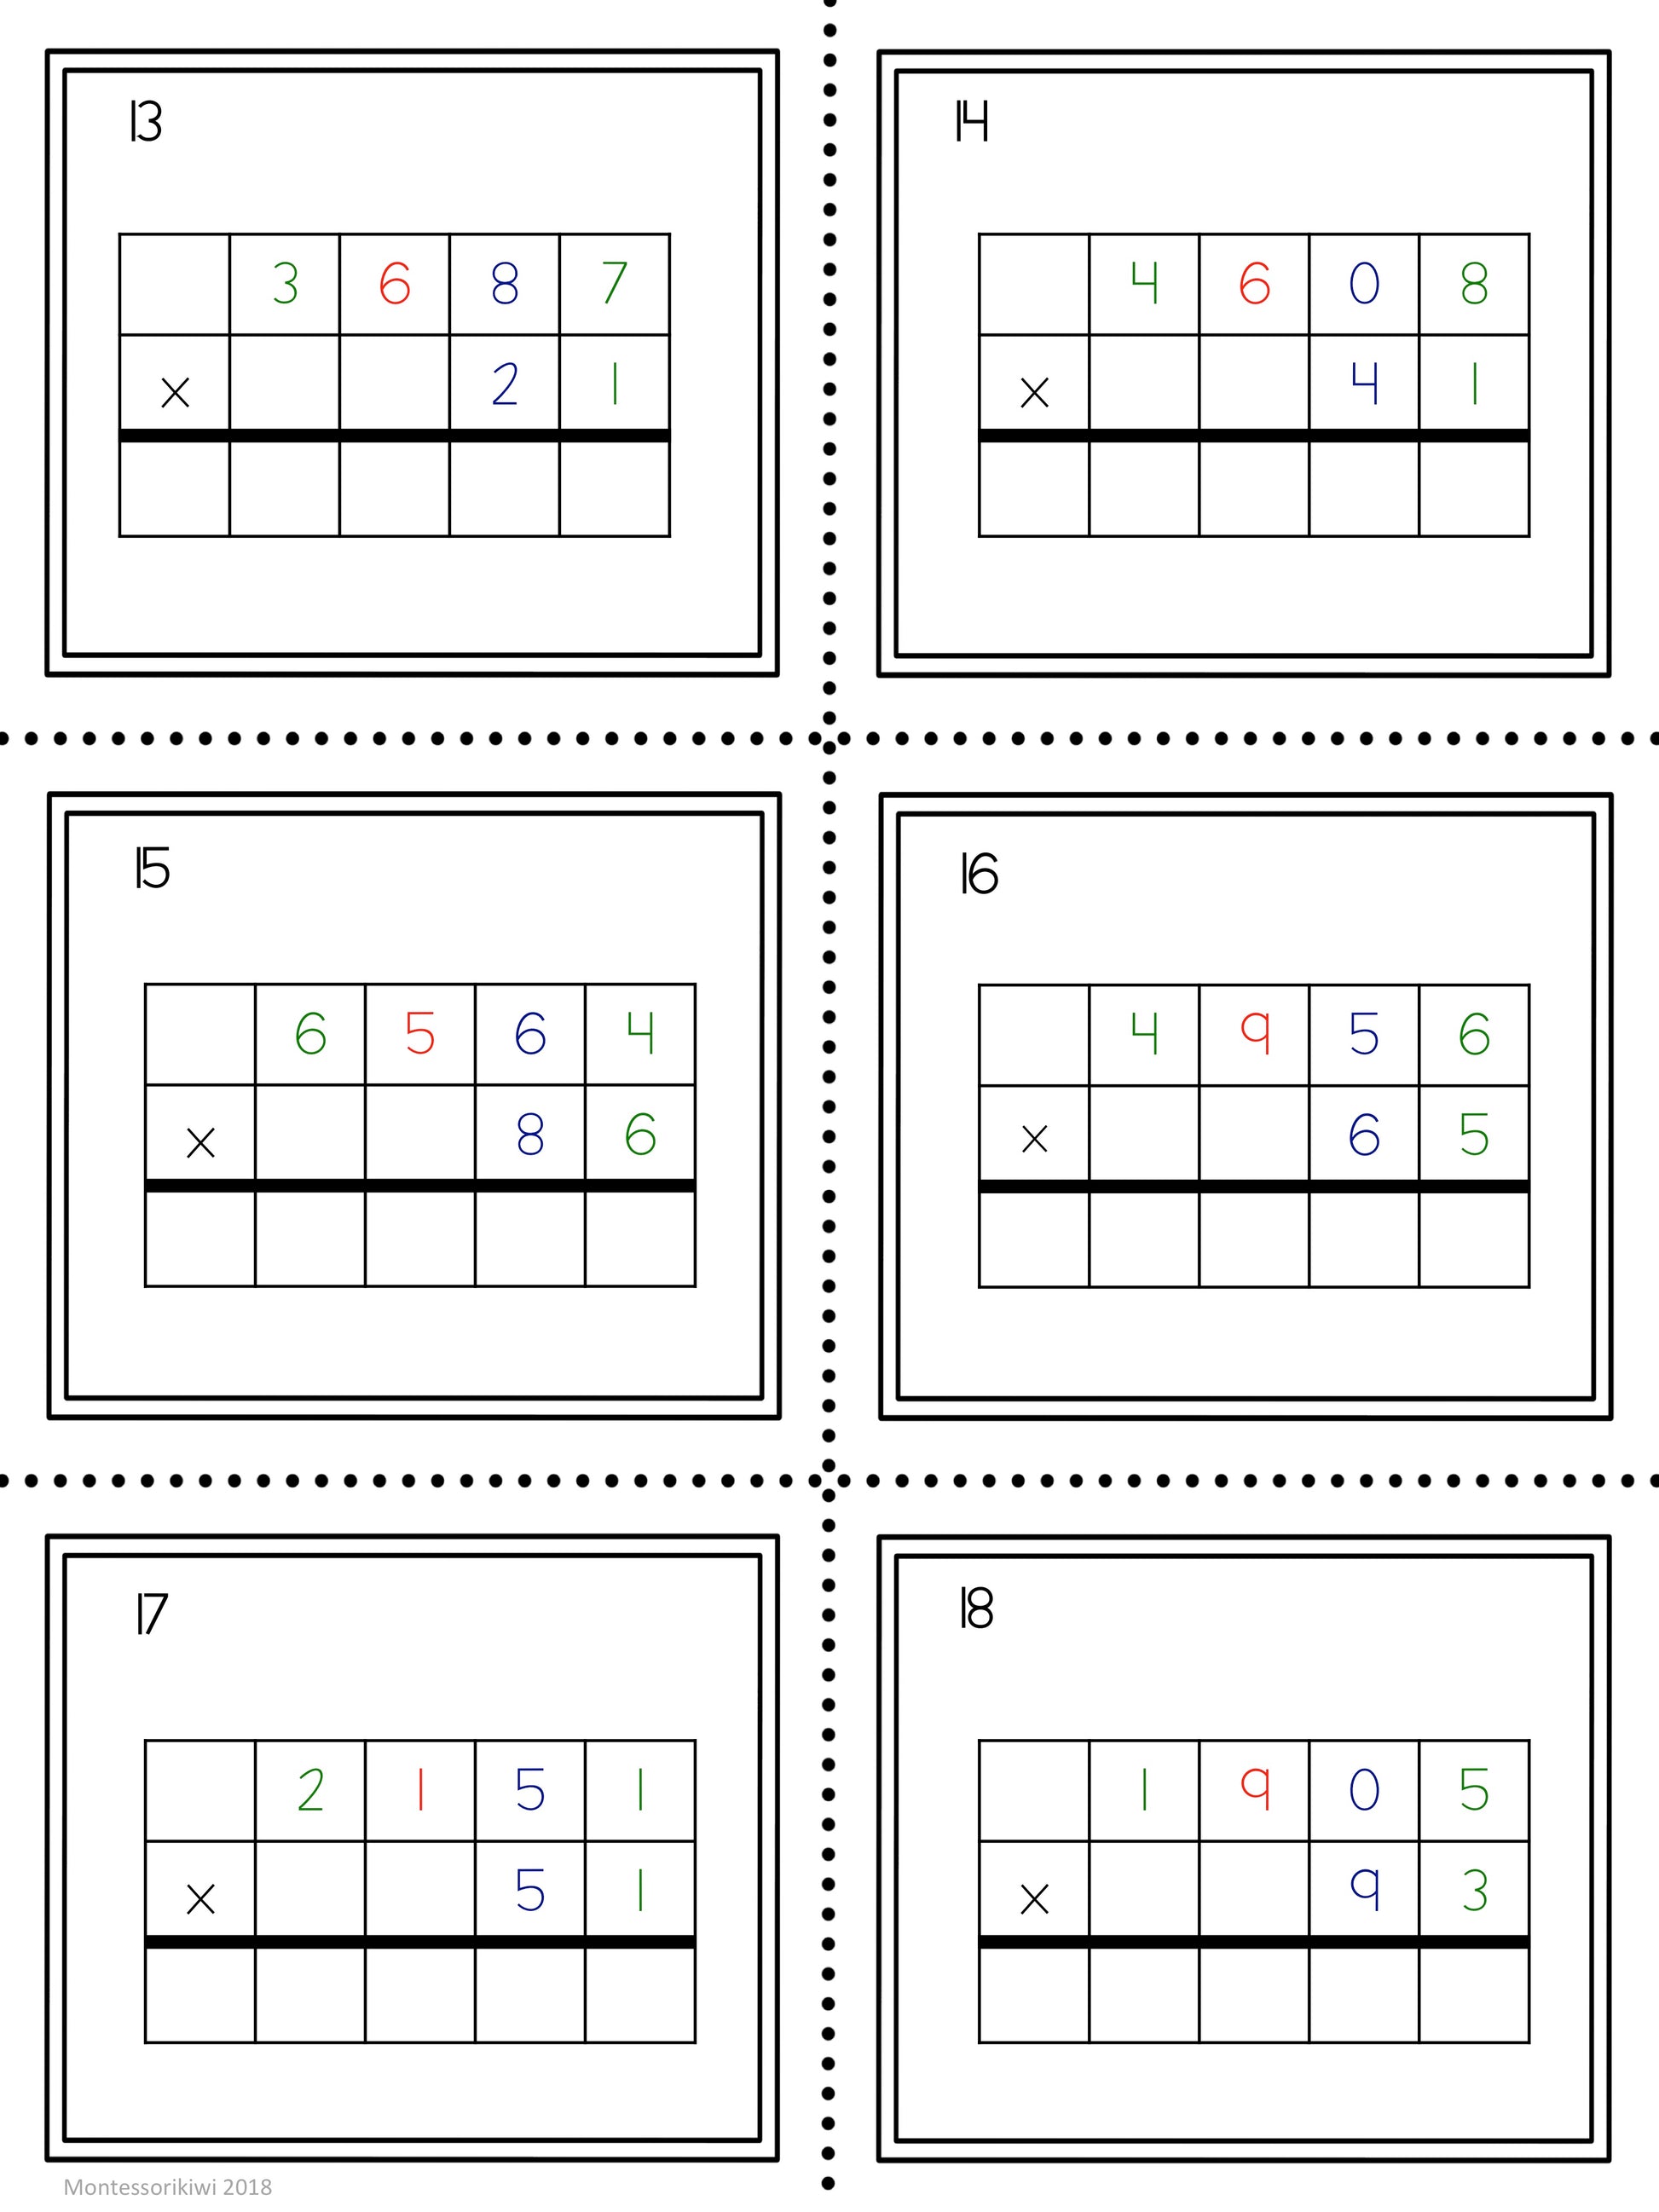 Multiplication questions: 2 and 3 digit multipliers - montessorikiwi